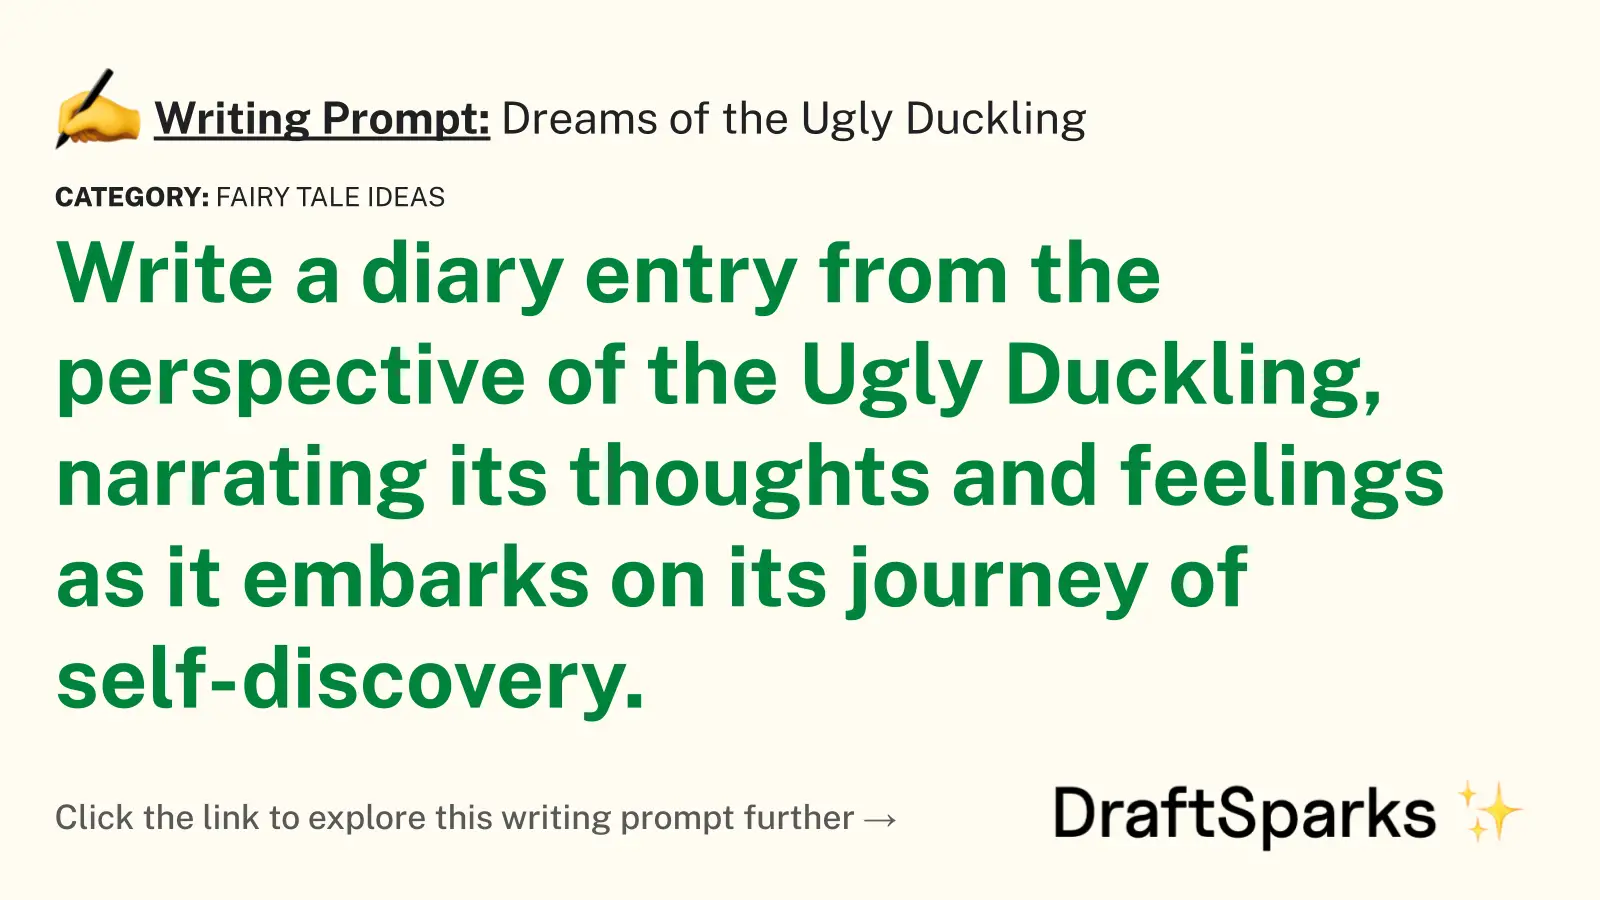 Dreams of the Ugly Duckling